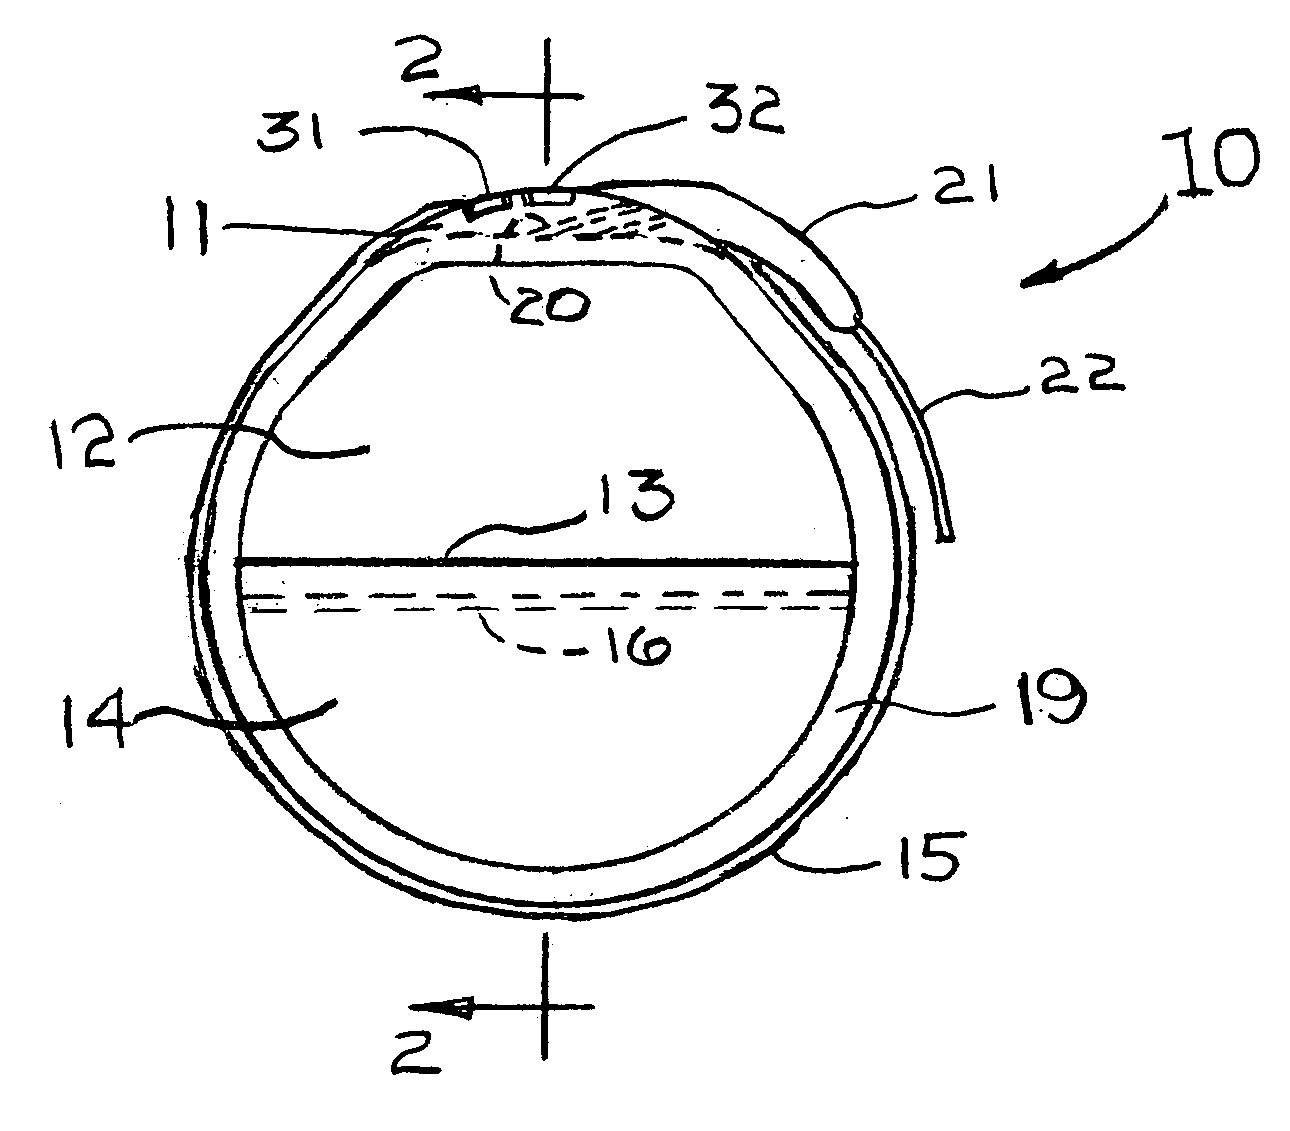 Cardiac pacemaker with integrated battery